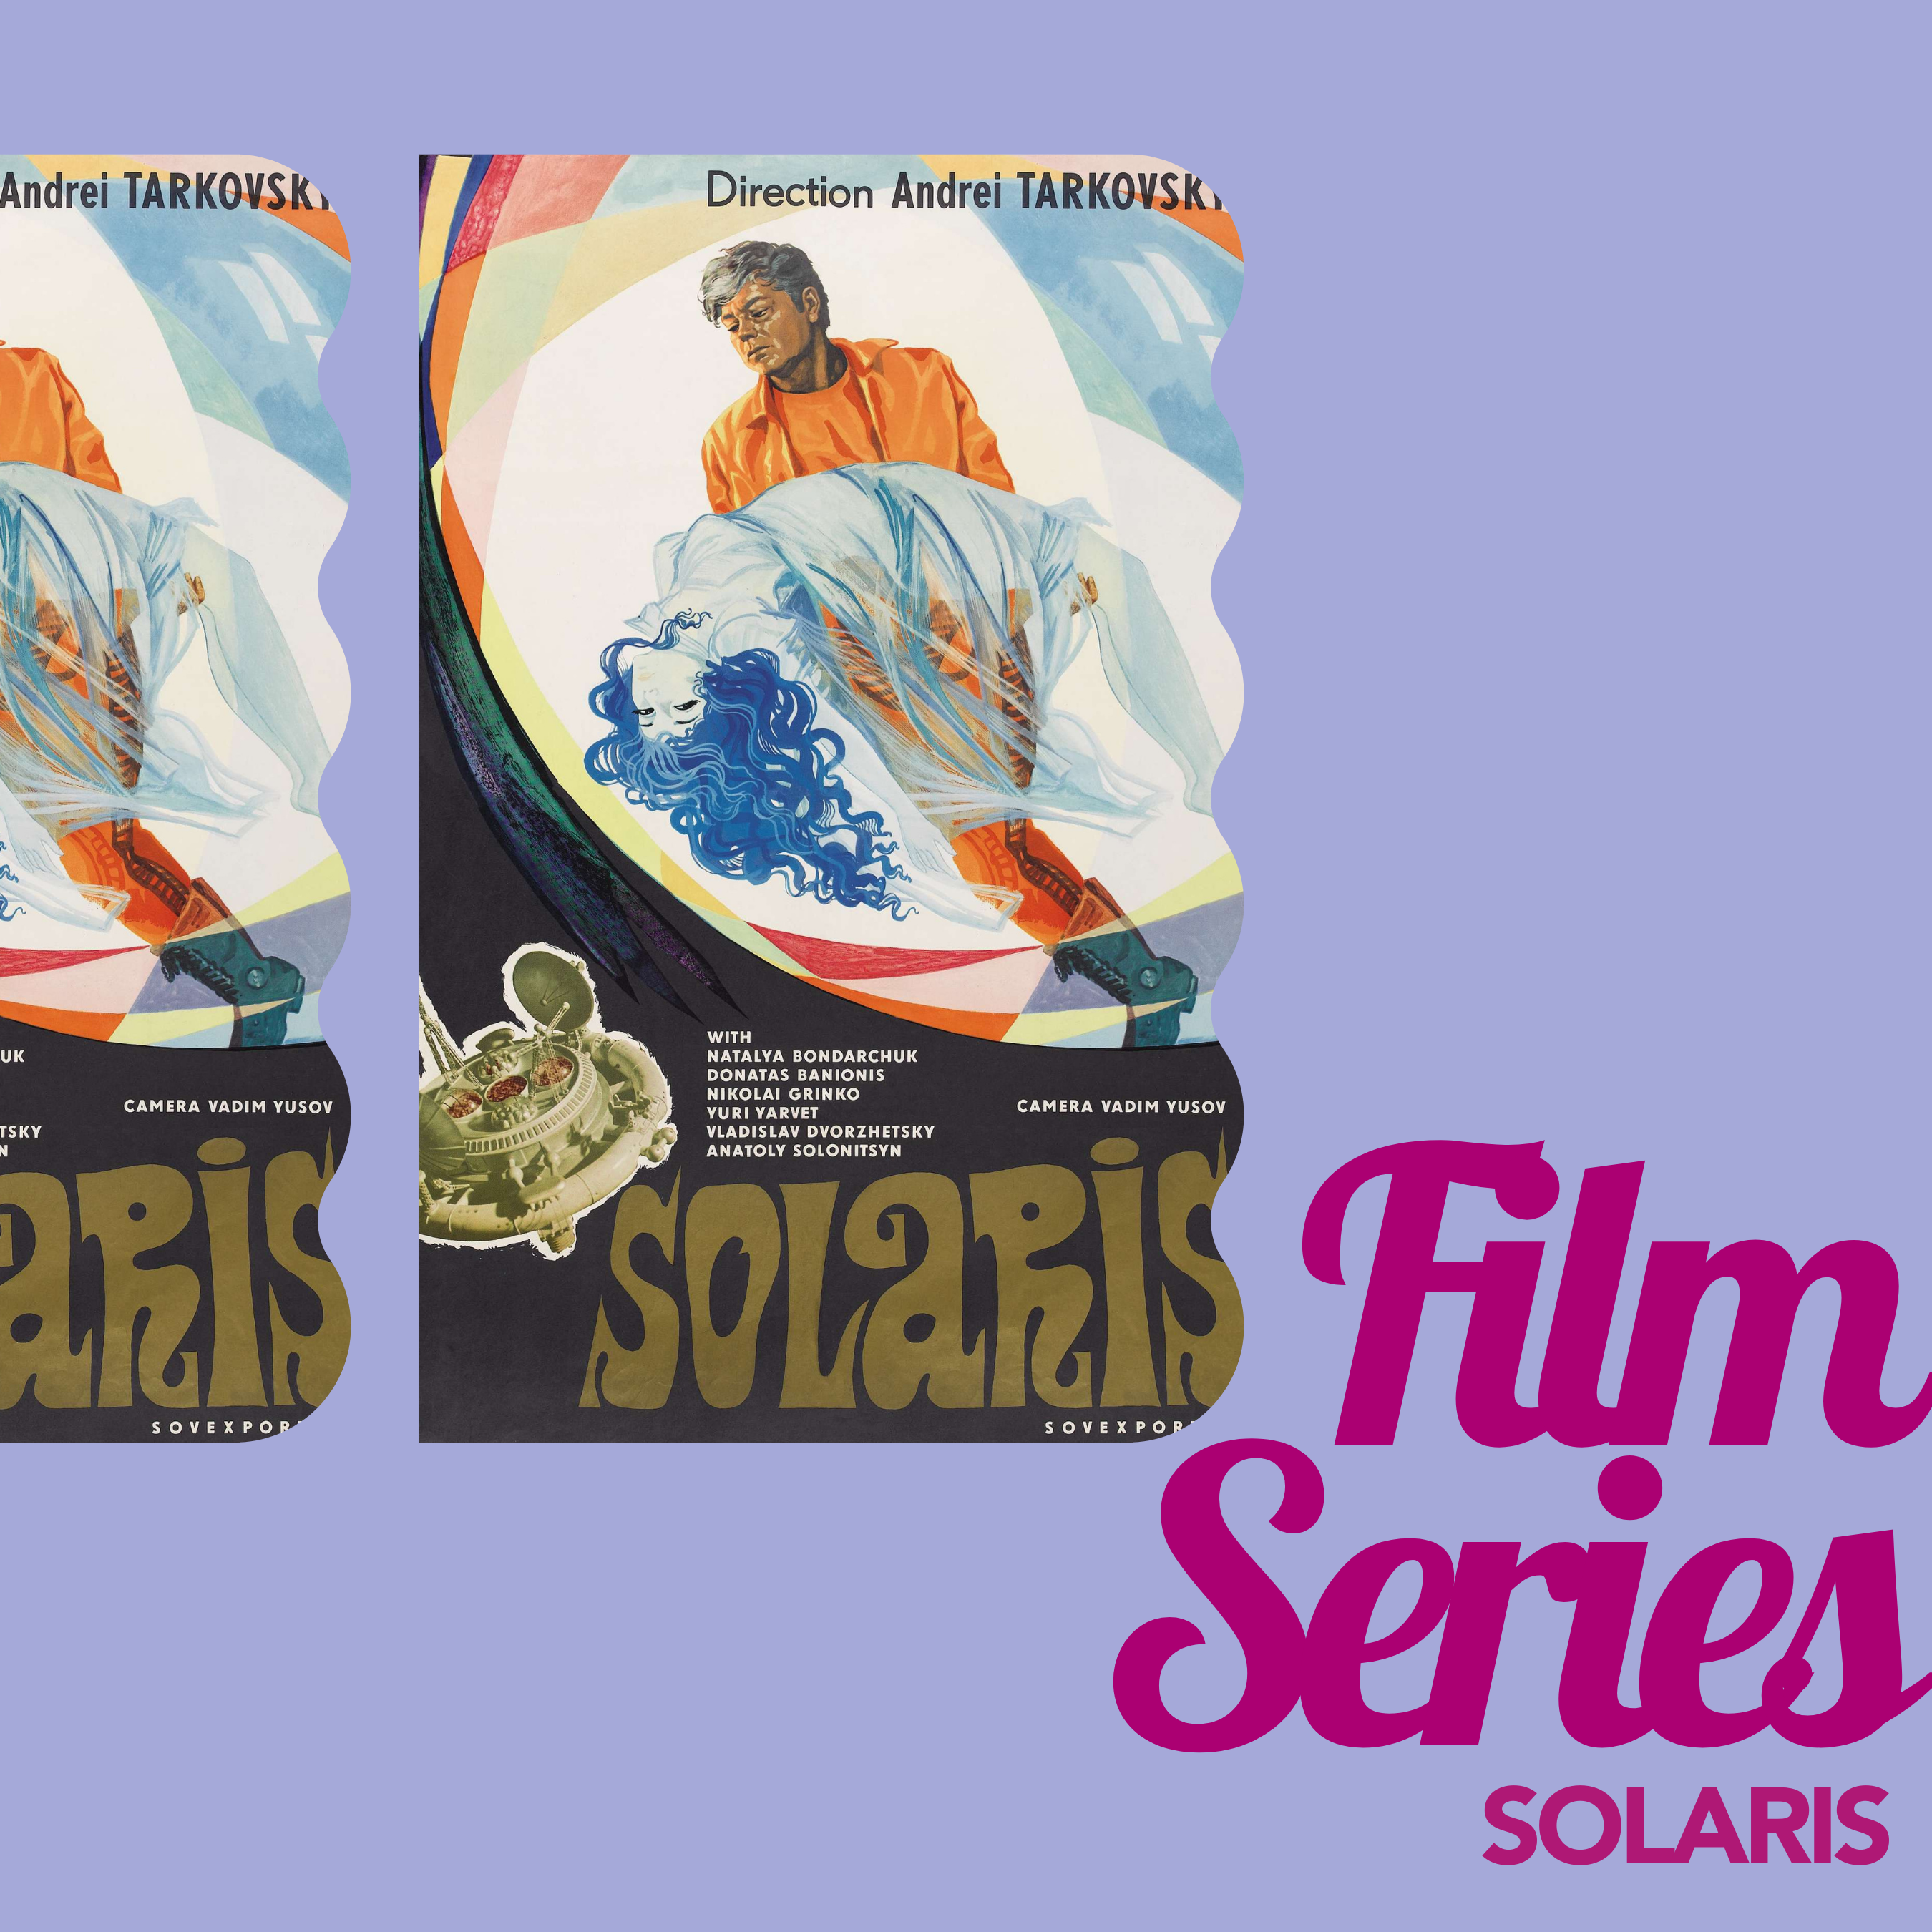 Event art with a lavender background and orchid text that reads, “Film Series” and “Solaris” on the bottom right. On the graphic, there are two images of the same film poster featuring a figure dressed in orange, holding what looks like a ghost-like figure dressed in an ice blue outfit. 